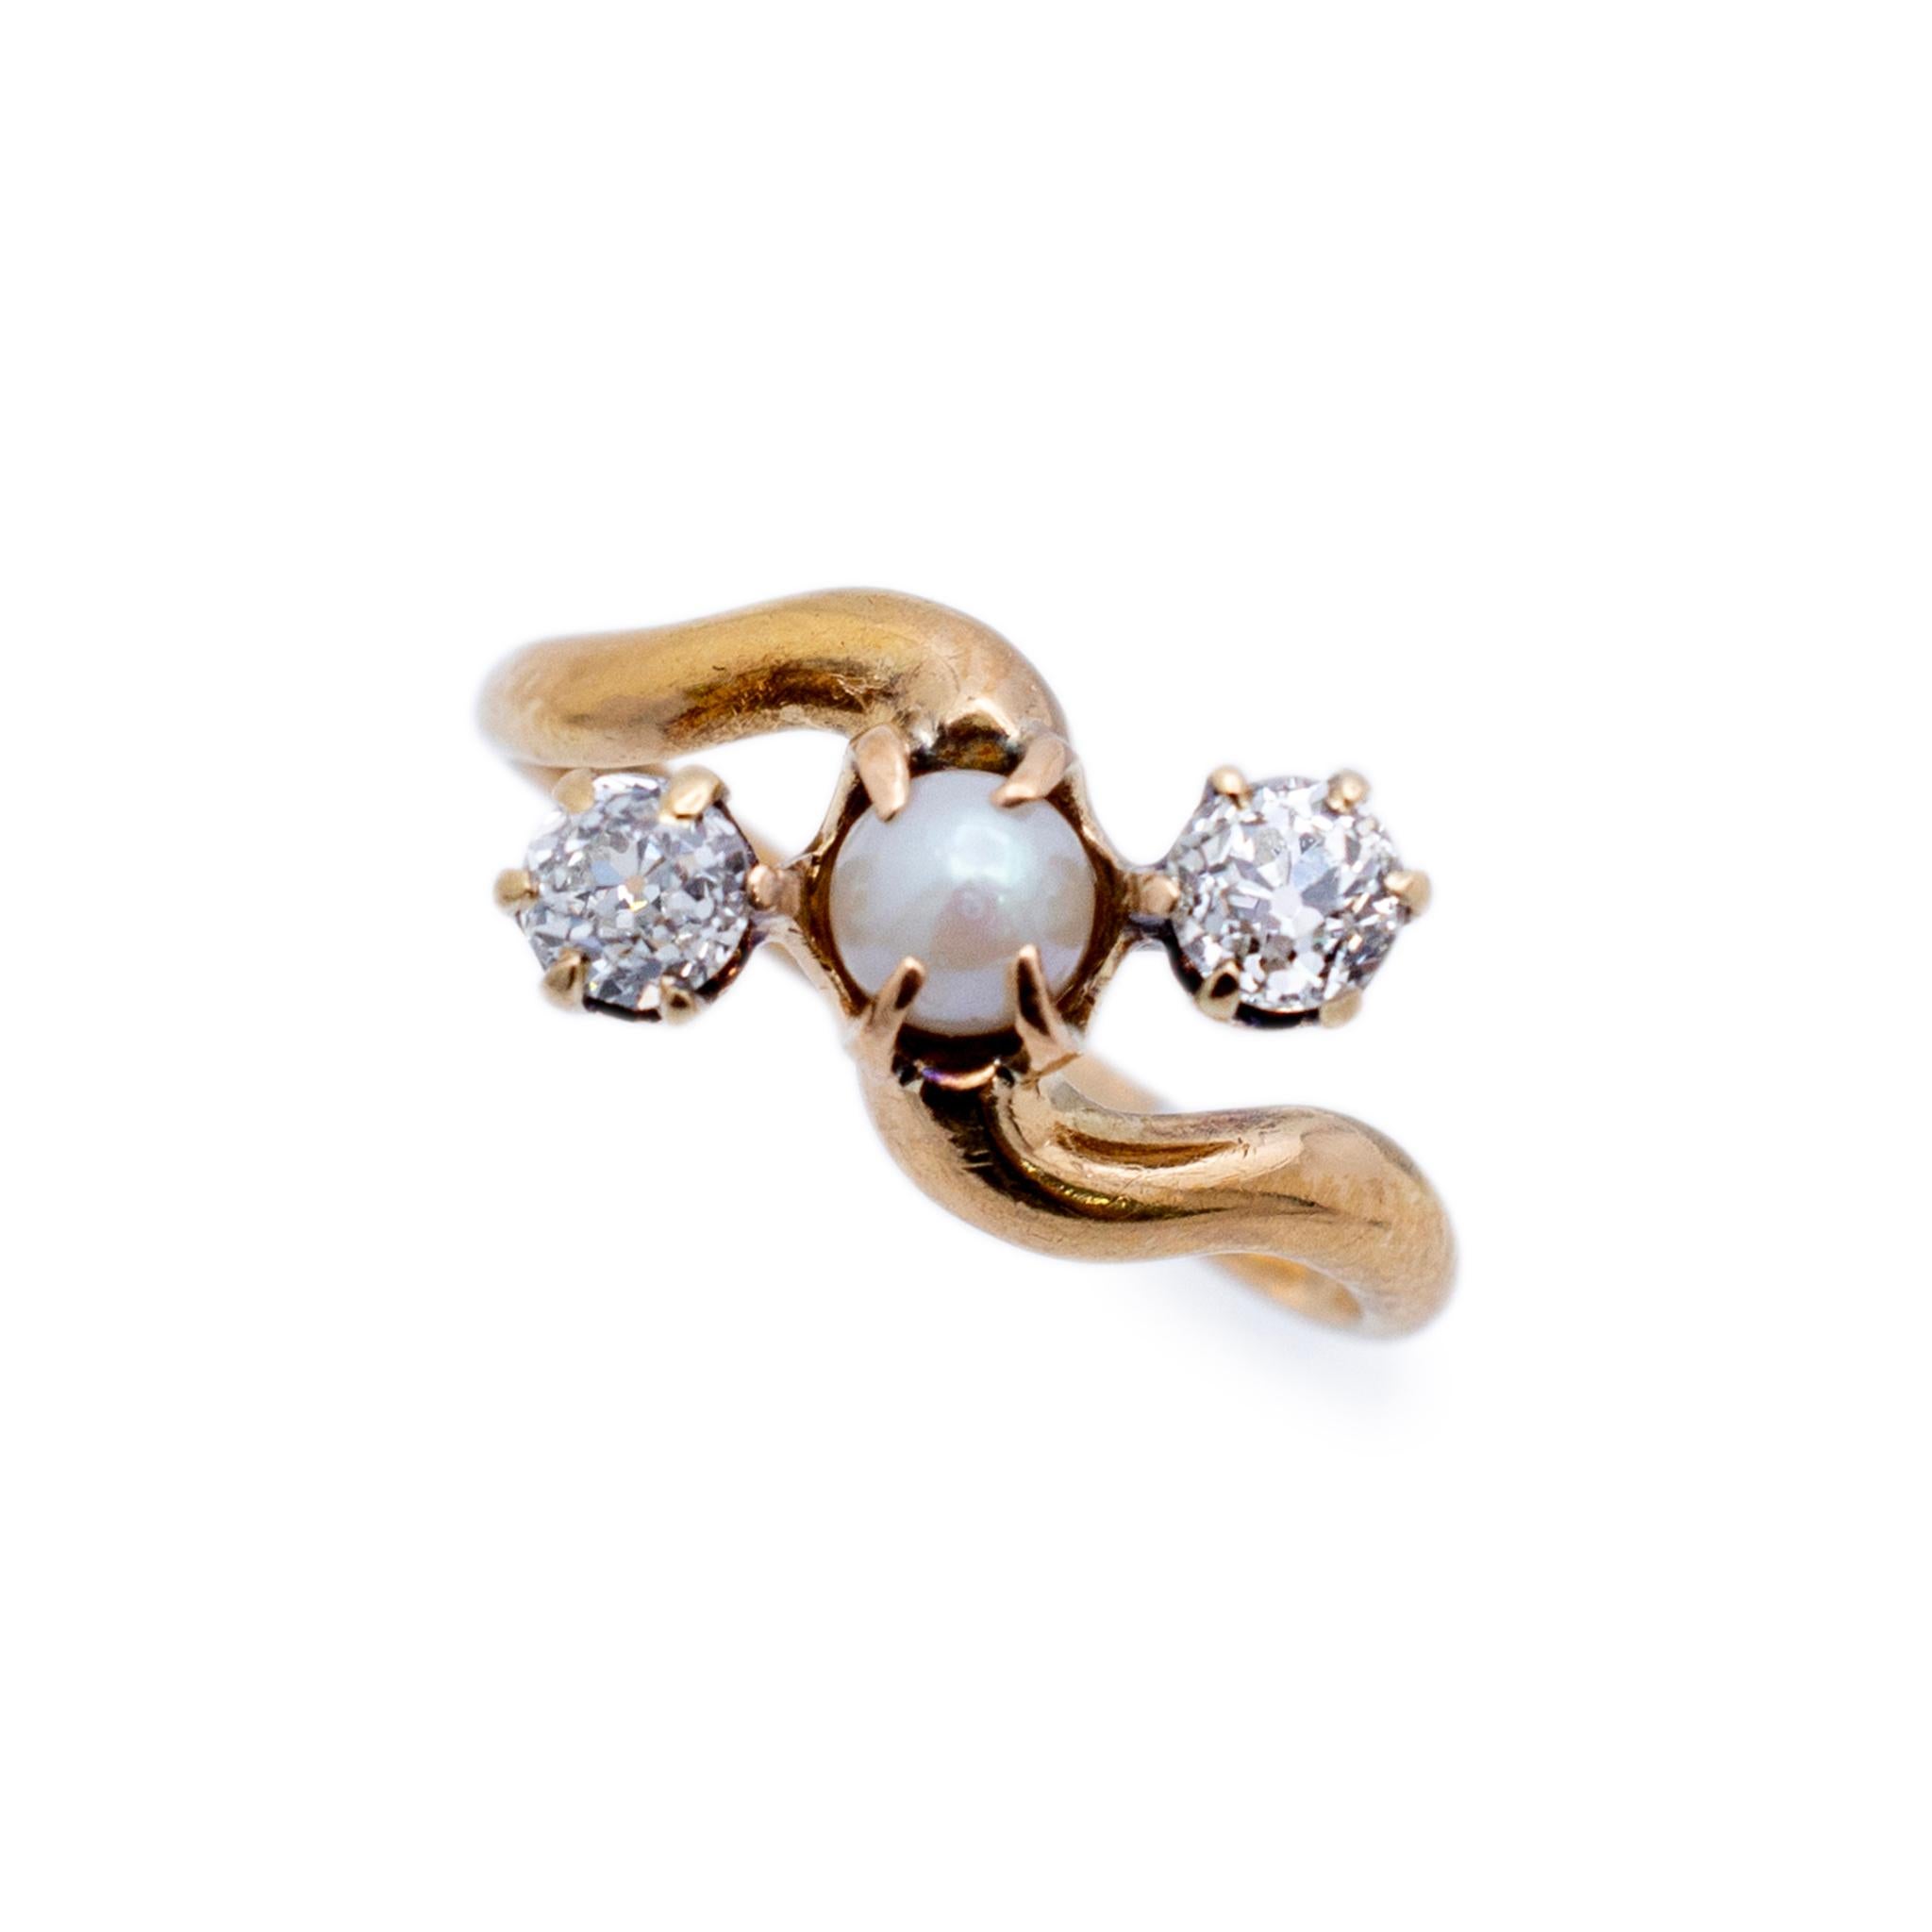 Gender: Ladies

Metal Type: 18K Yellow Gold

Ring Size: 5.5

Head measurements:  9.50mm in width

Shank maximum width:  2.45mm

Weight: 2.40 grams

18K yellow gold three-across diamond and pearl antique cocktail ring with a half round shank. The